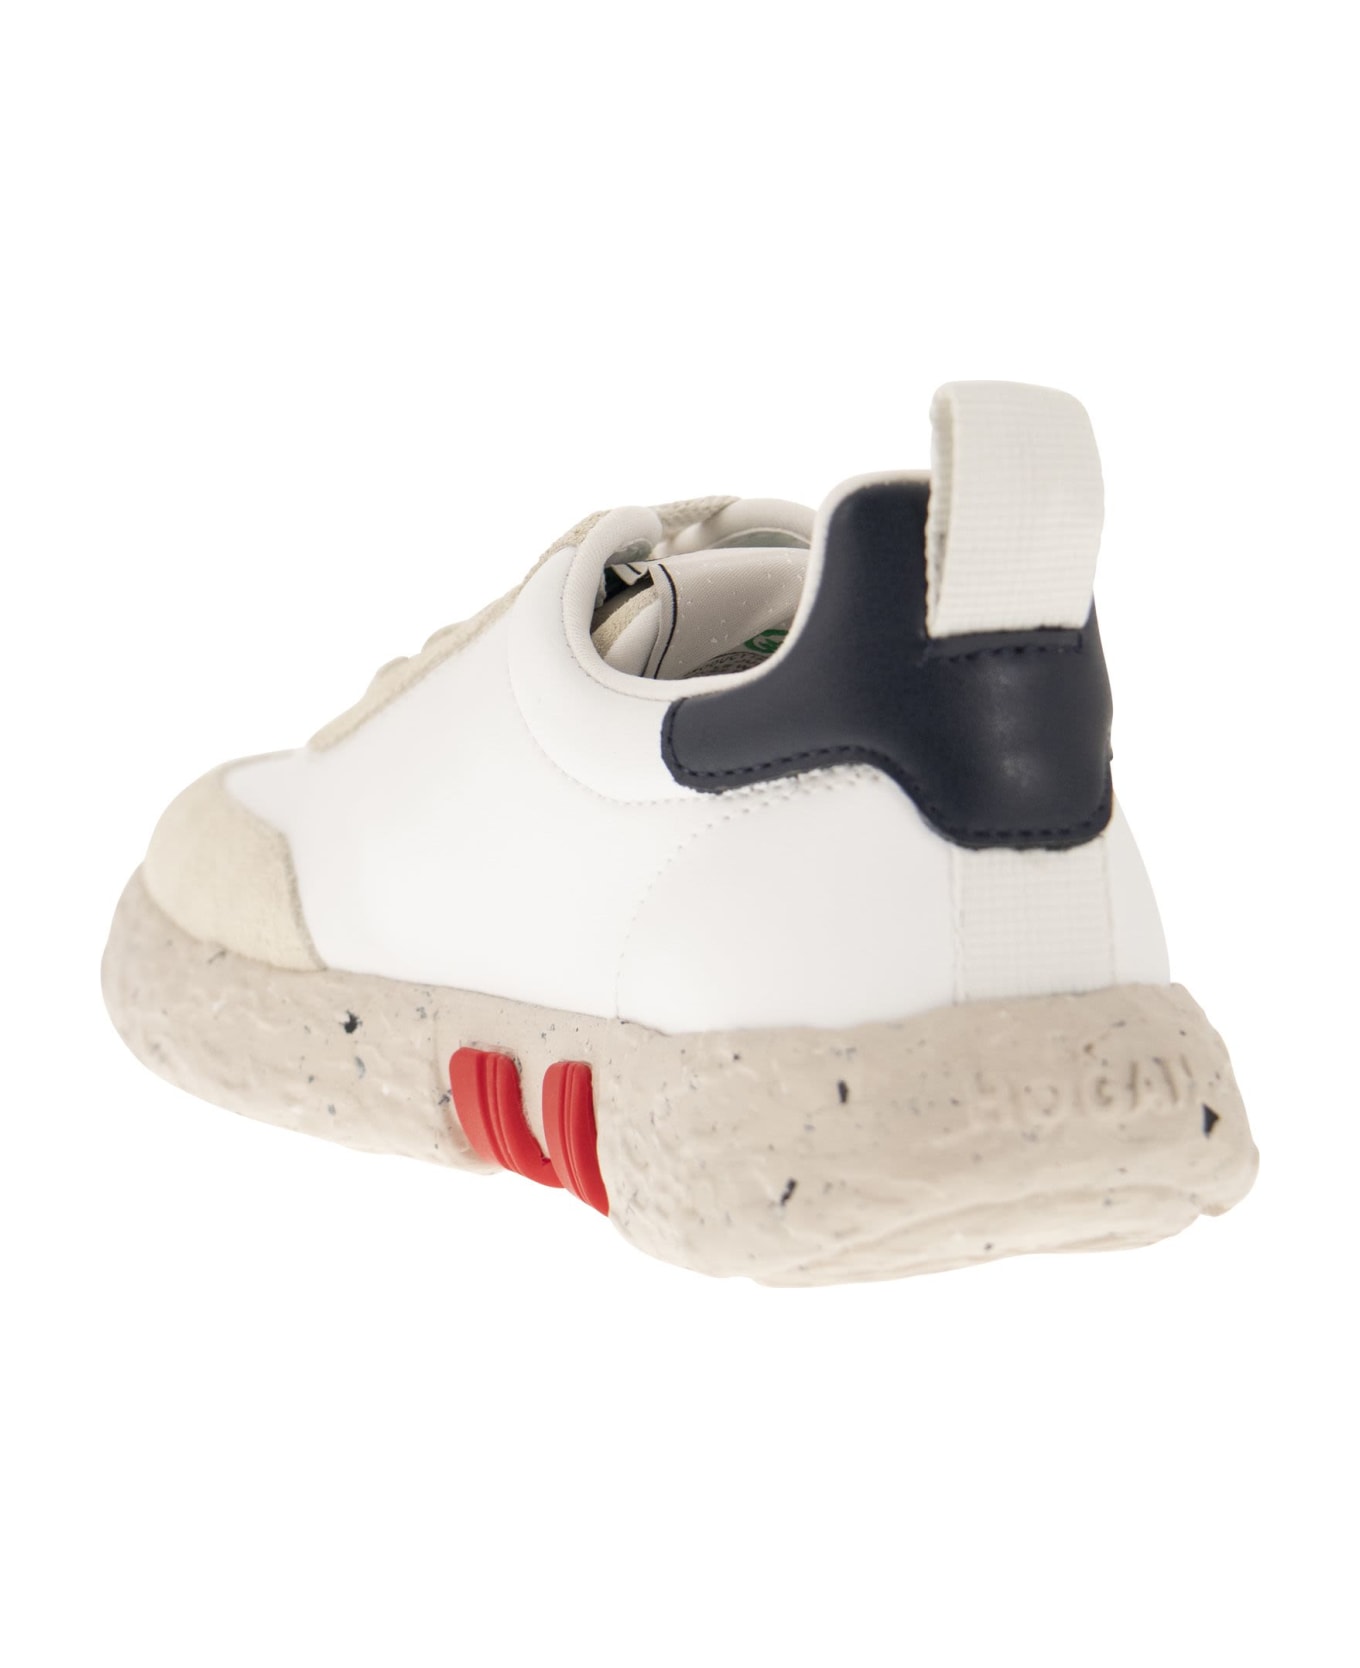 Hogan Sneakers -3r - White/red/blue